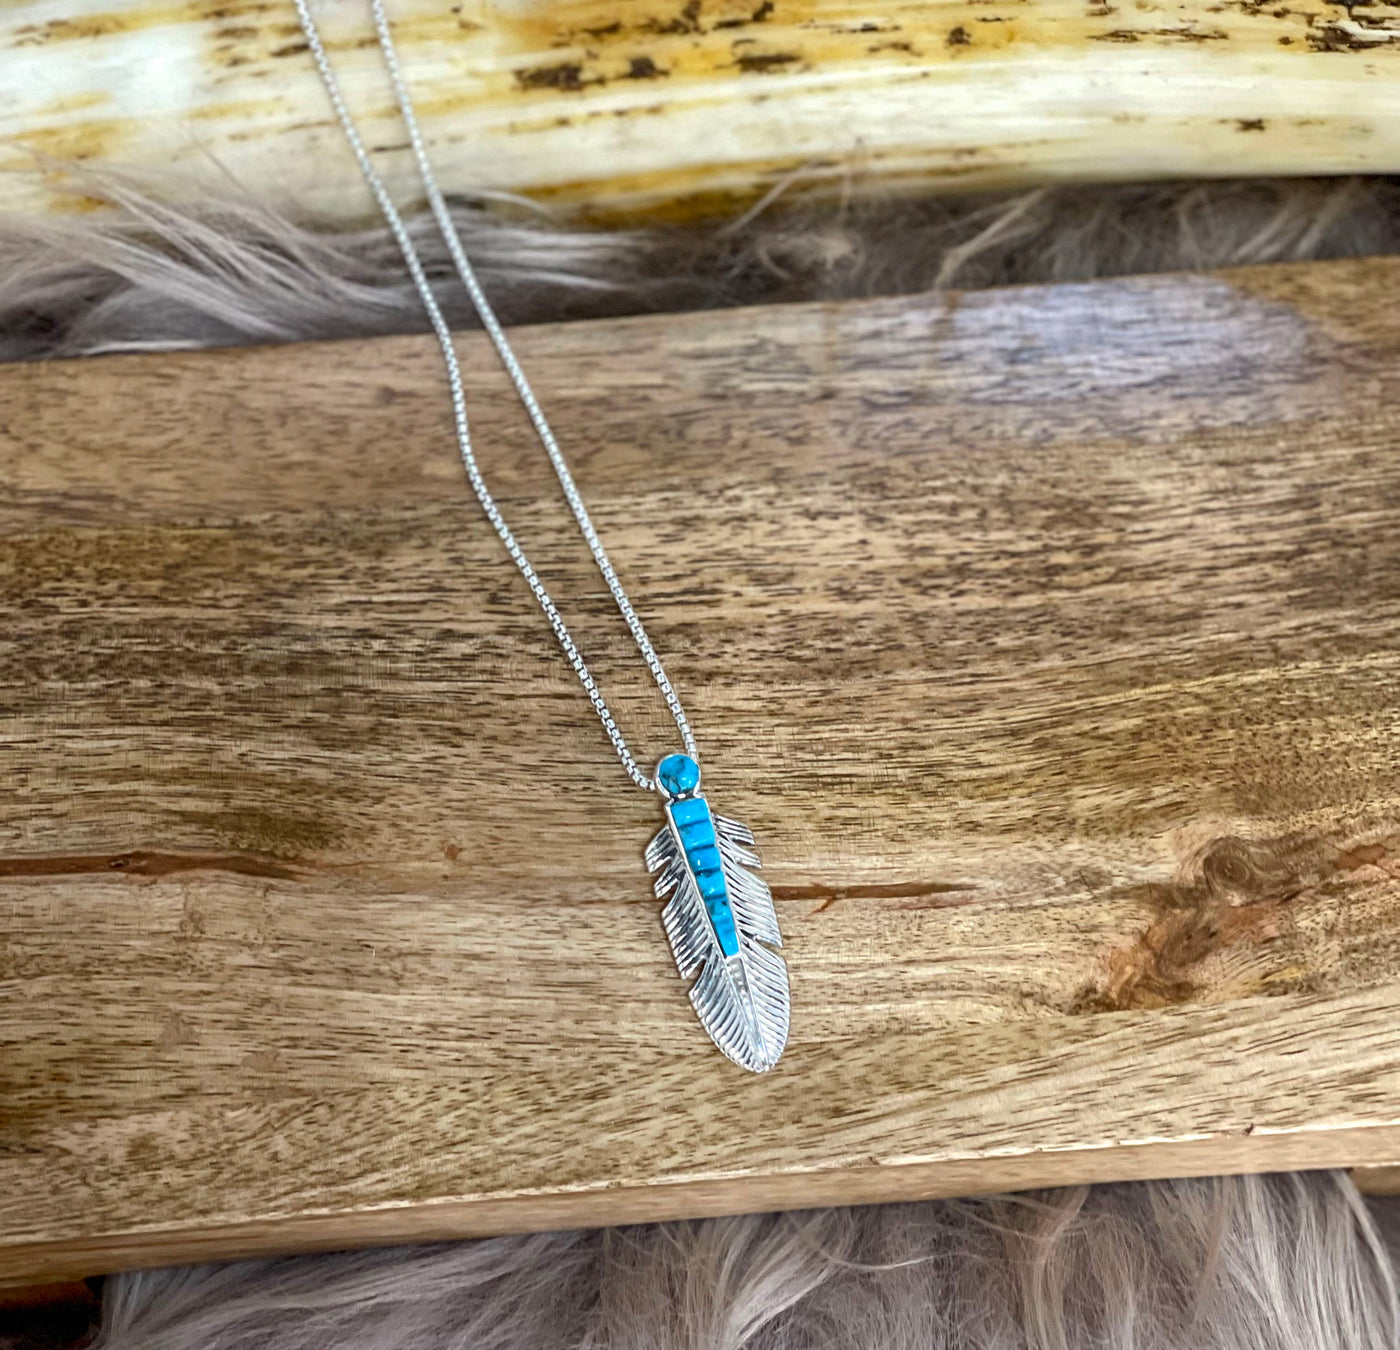 G3 Marksman Feather Turquoise and Silver Necklace